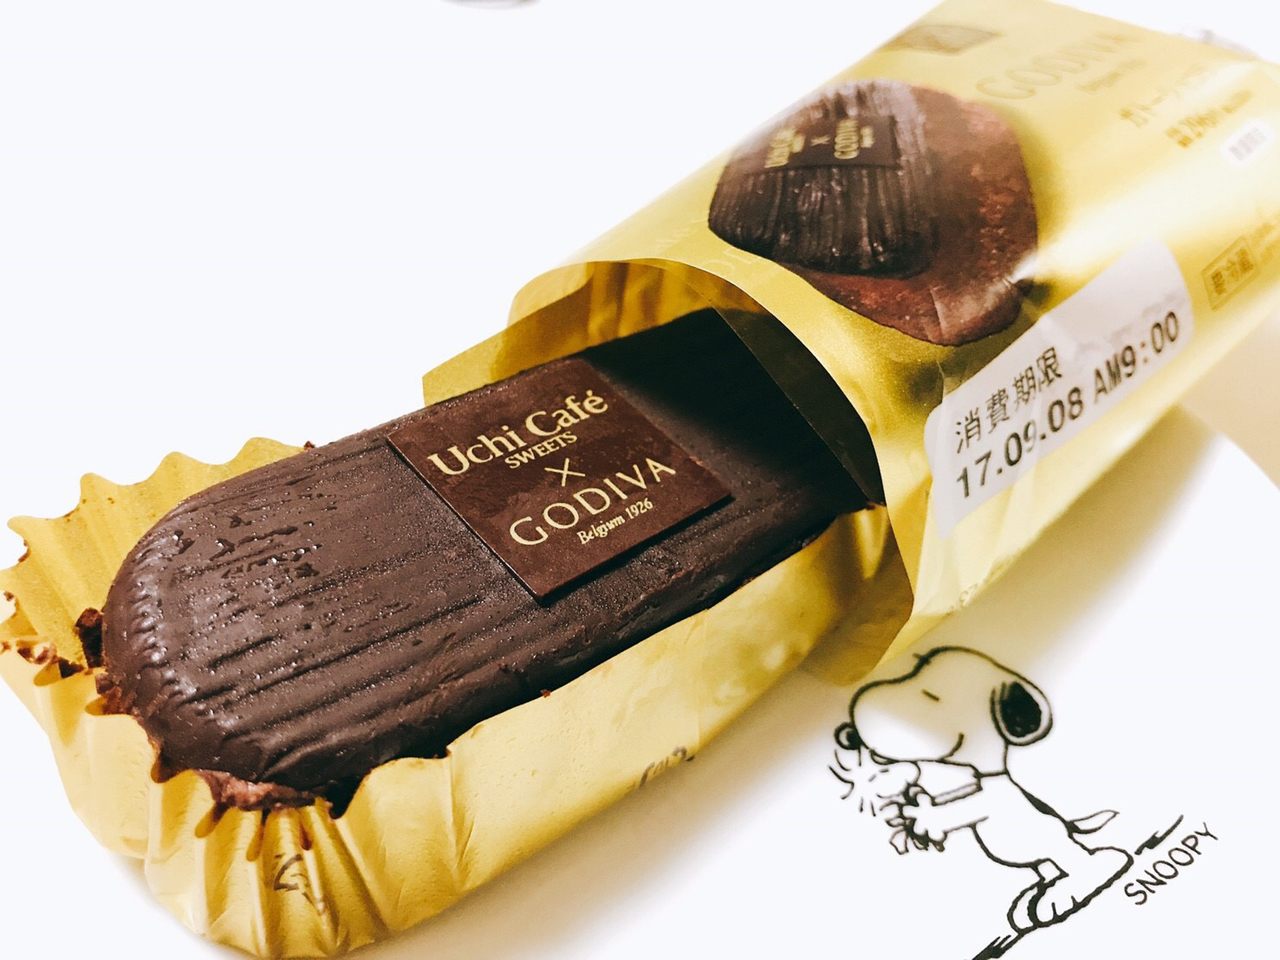 Lawson S Uchi Cafe Sweets Godiva Gateau Au Chocolat A Conbini Sweets New Product Review Good Luck Trip